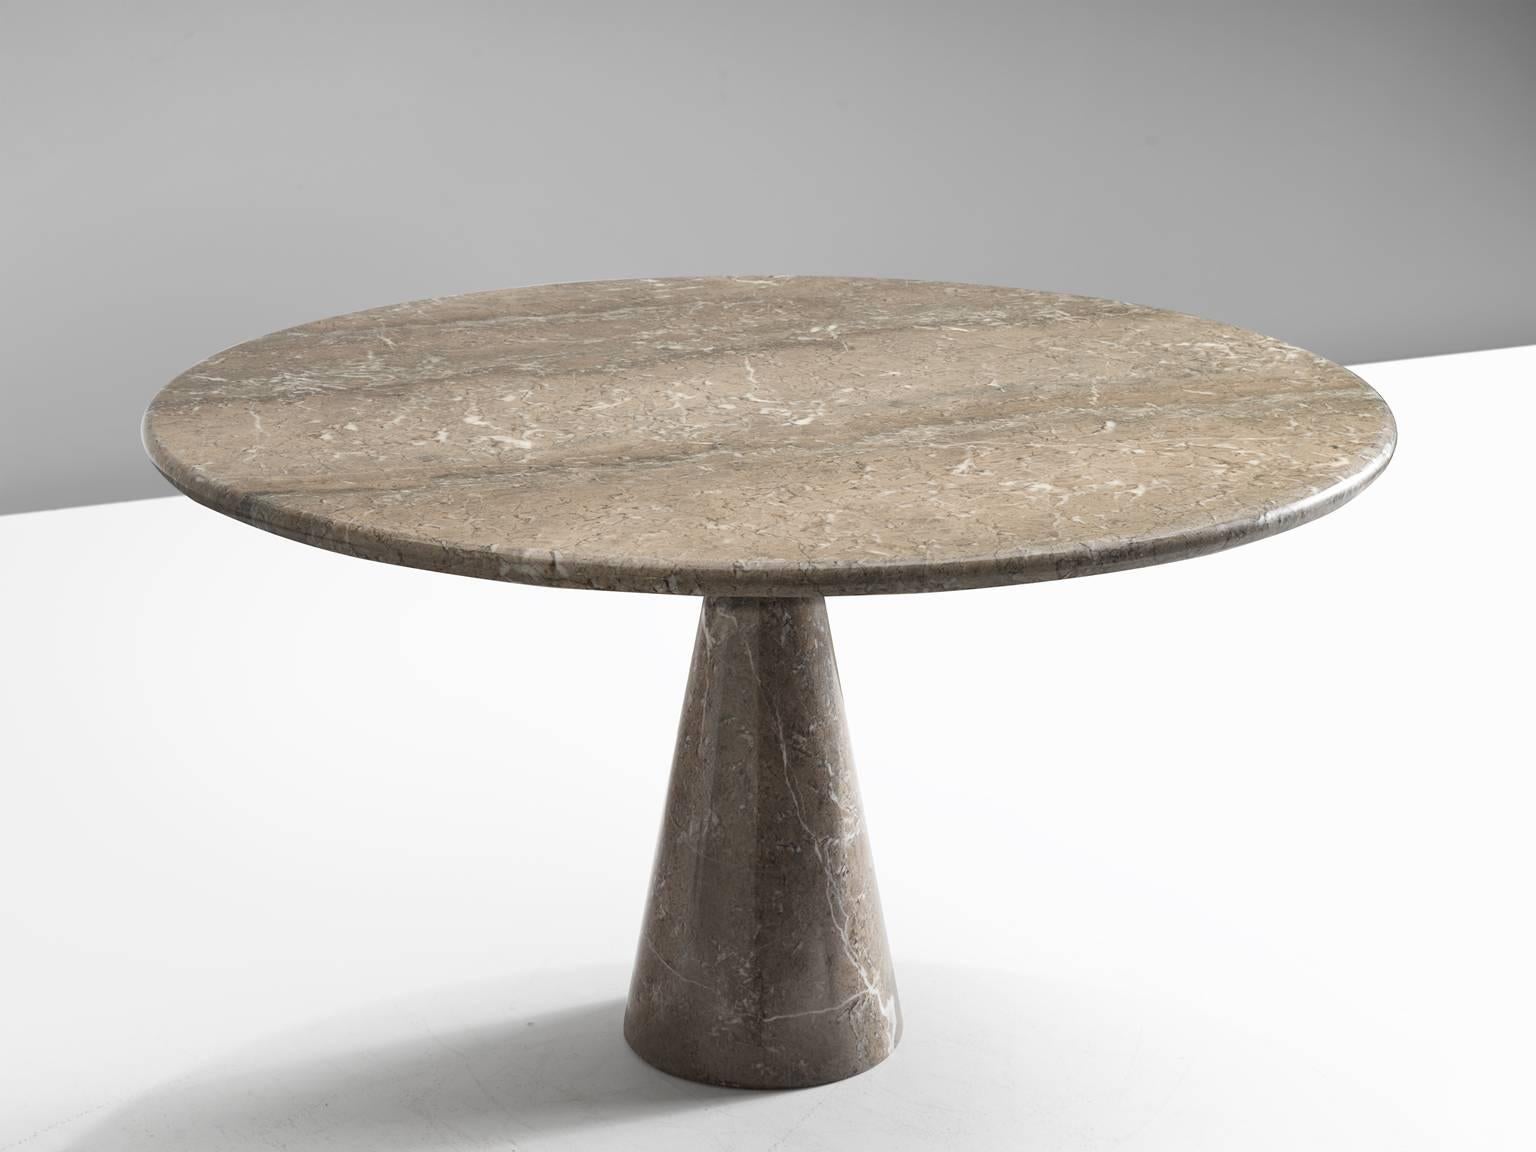 Dining table, marble, by Angelo Mangiarotti and made by the company T70, Italy, 1969

This solid grey table has a cone shaped base and a circular top. The circular top rests perfectly on the cone. The design showcases a play of balance and rhythm.